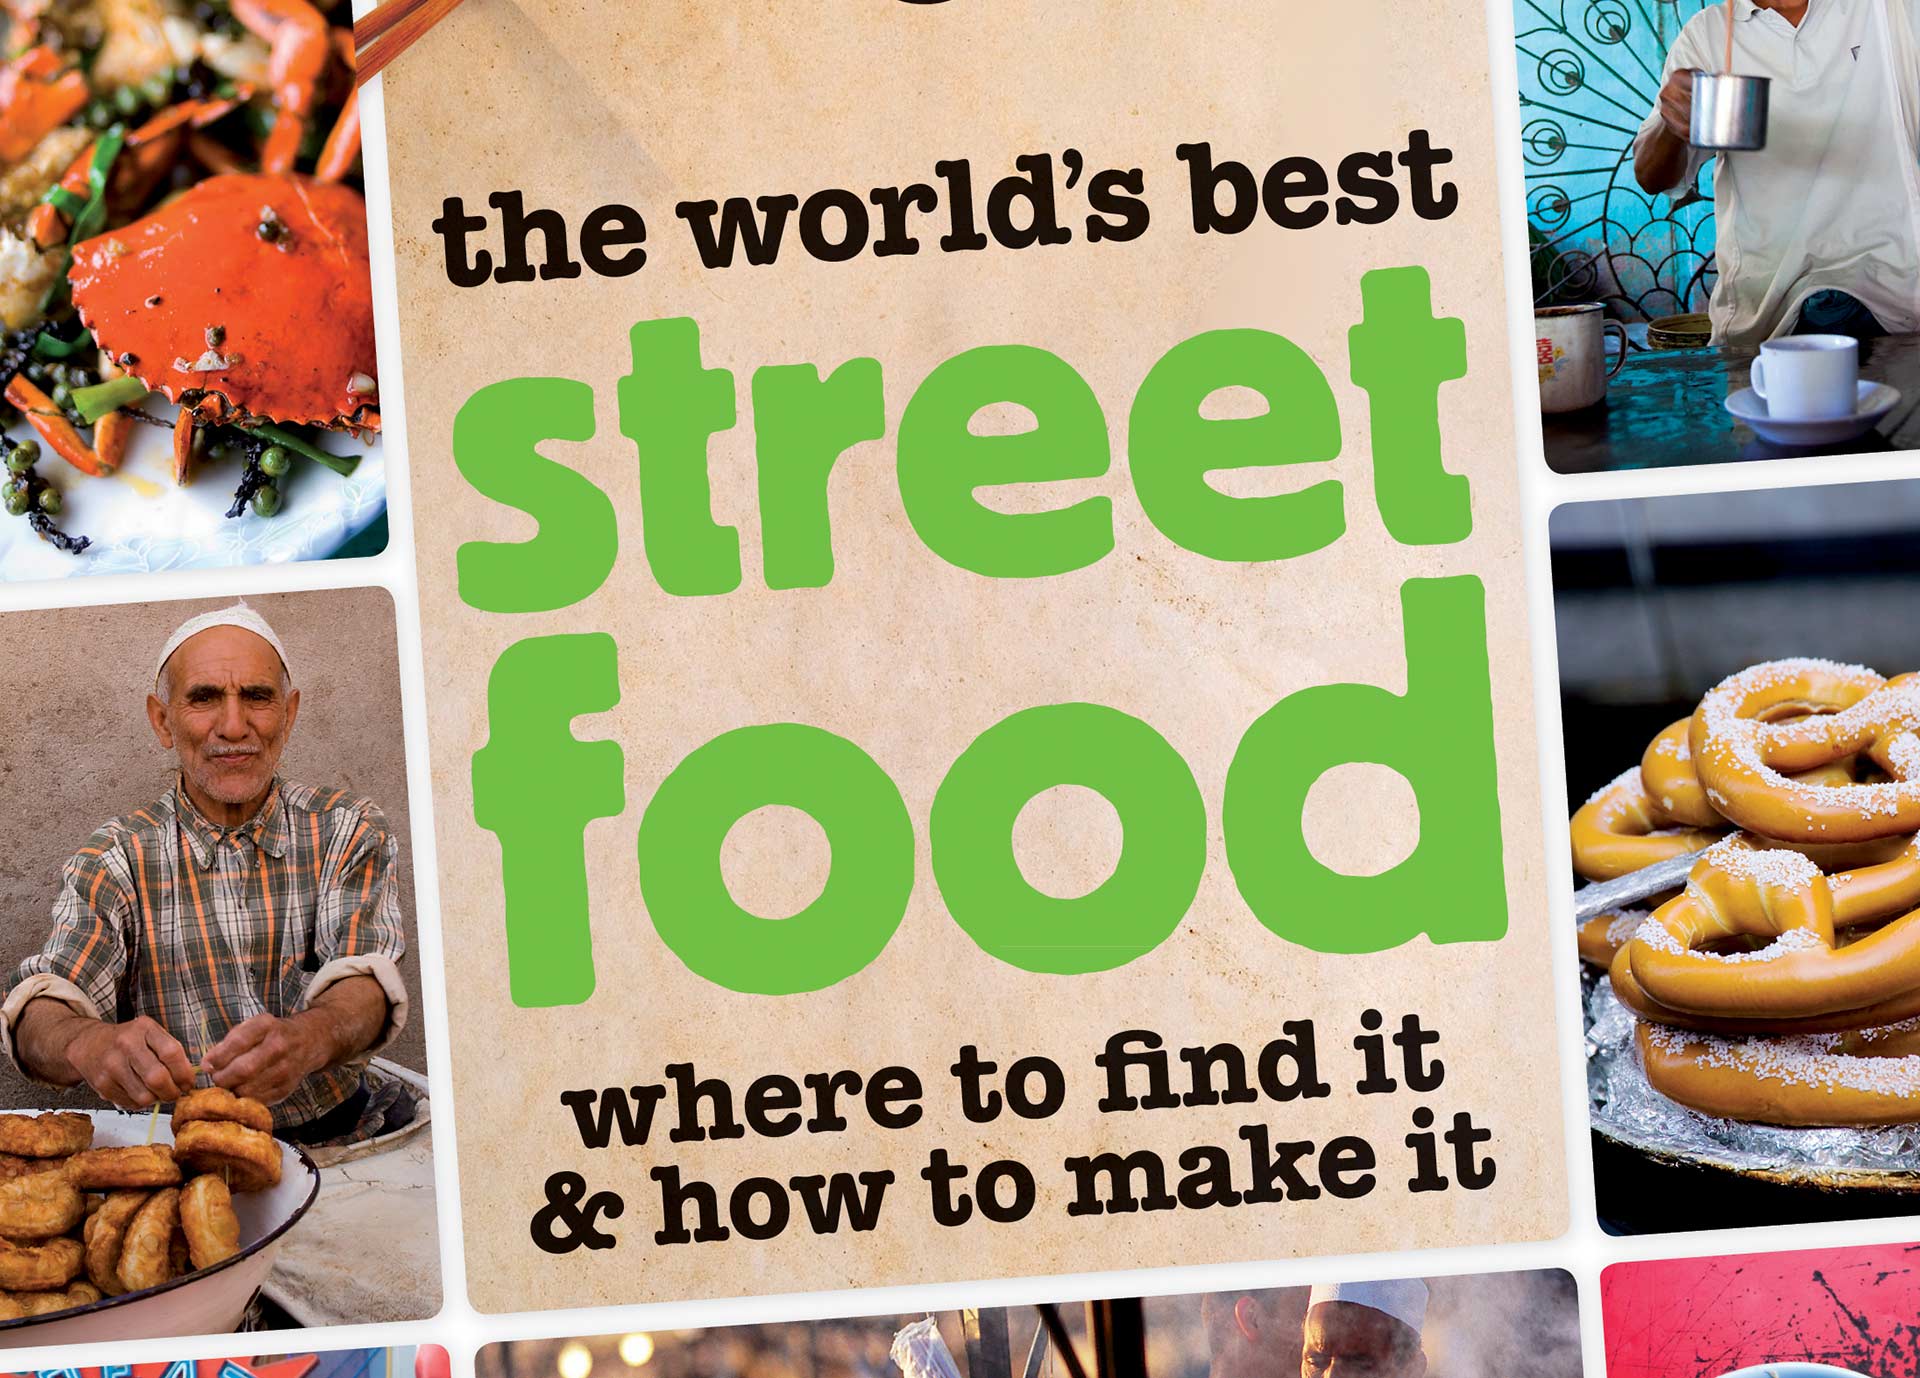 The Worlds Best Street Food by lonely planet